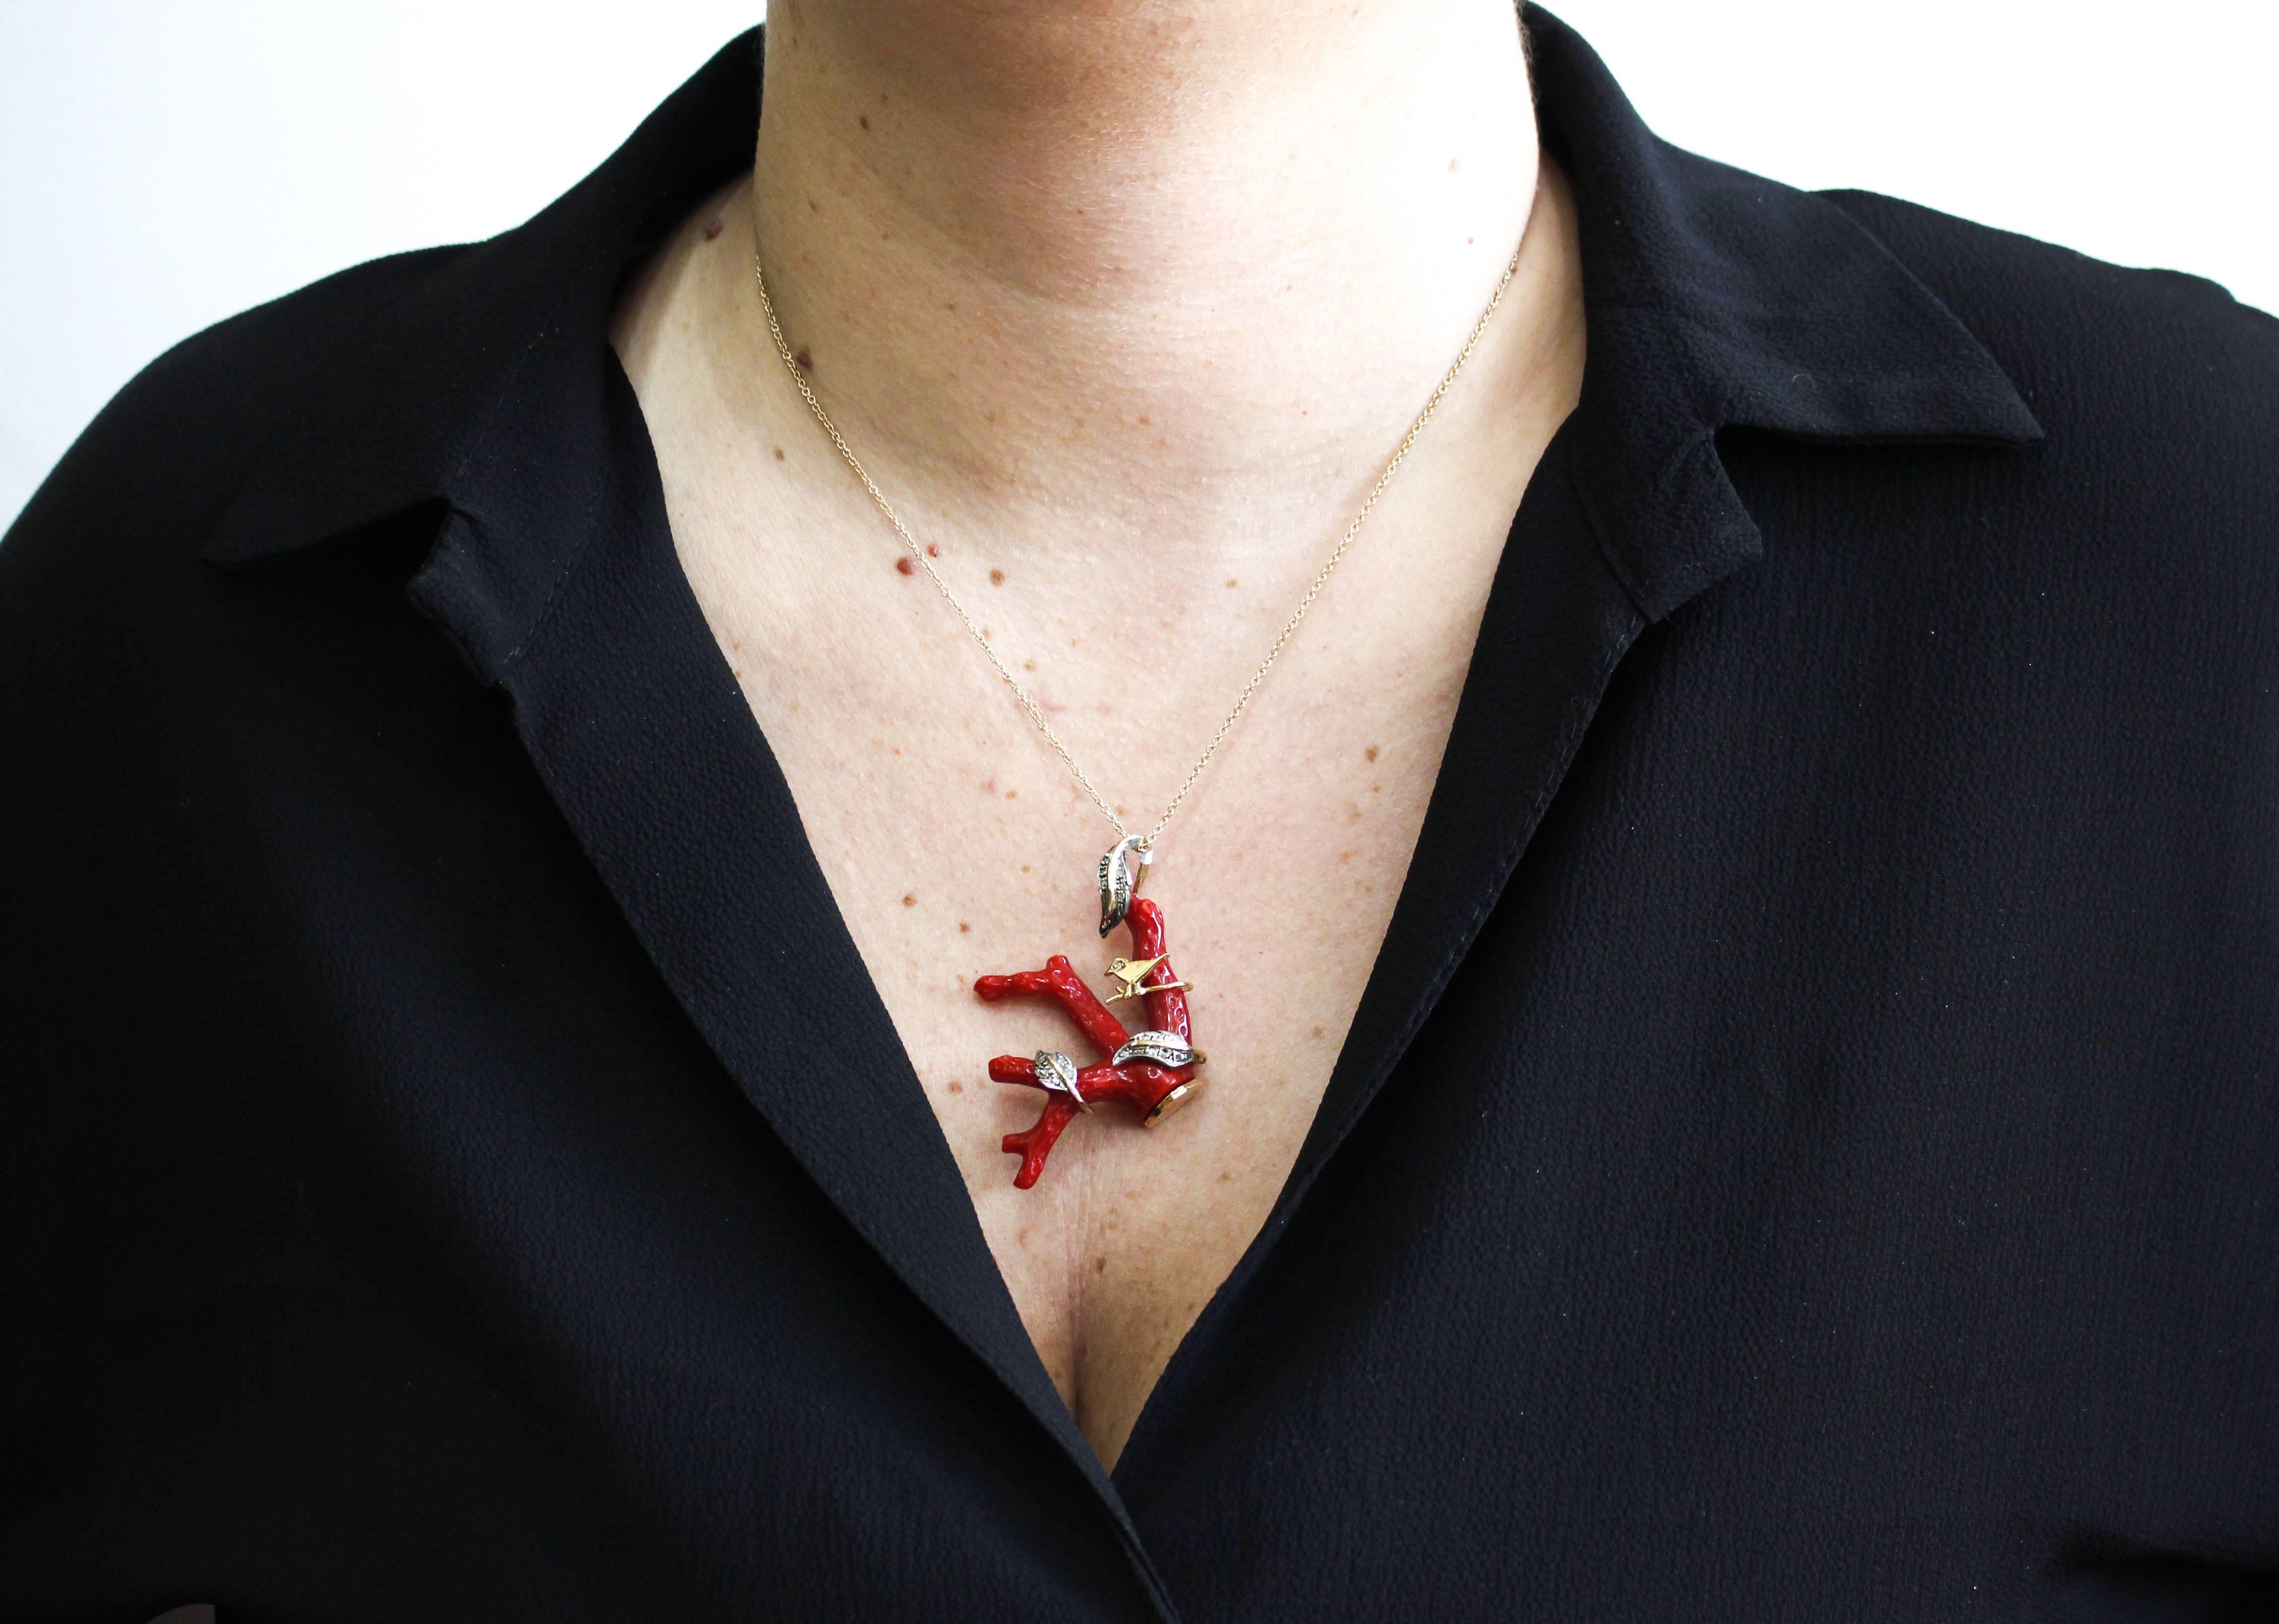 Mixed Cut Diamonds, Red Coral Branch Shape, Rose Gold and Silver Branch Pendant Necklace